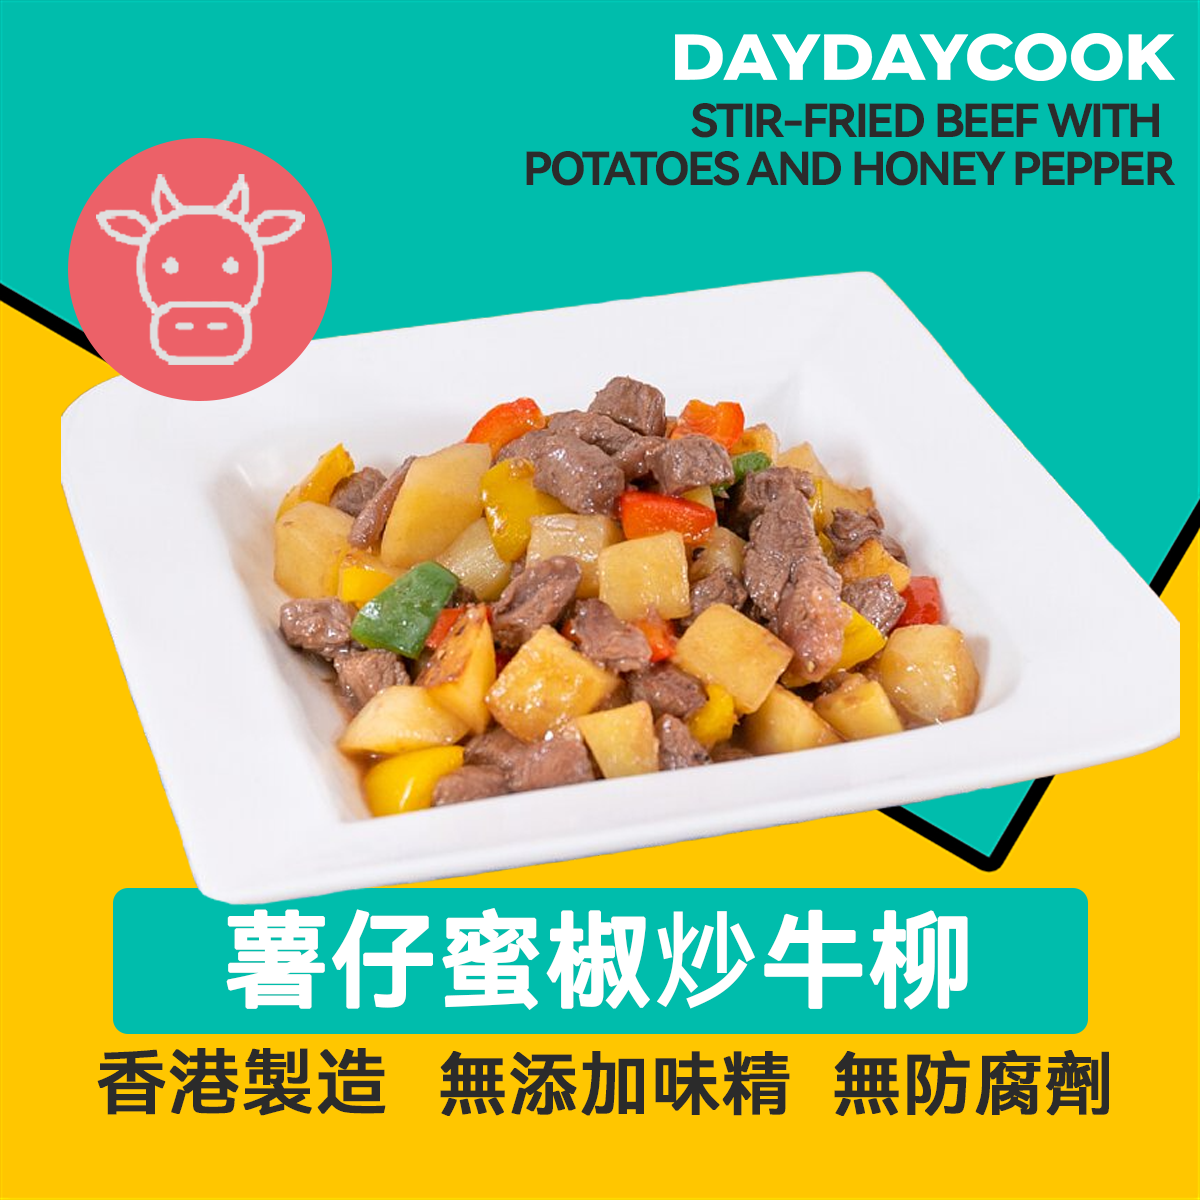 Stir-fried Beef with Potatoes and Honey Pepper